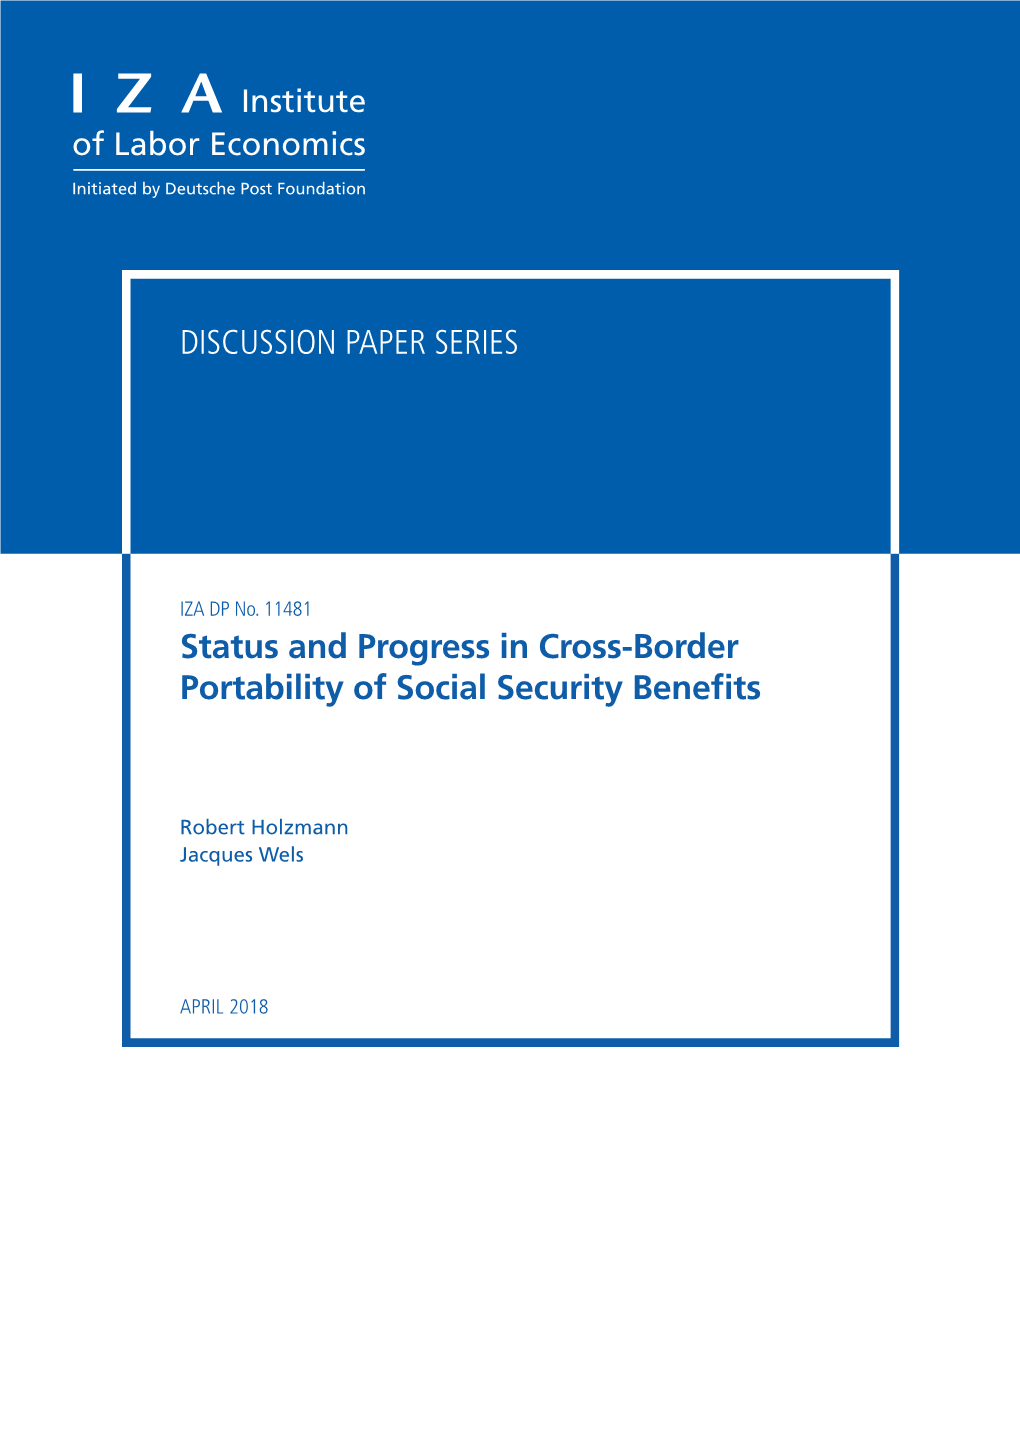 Status and Progress in Cross-Border Portability of Social Security Benefits